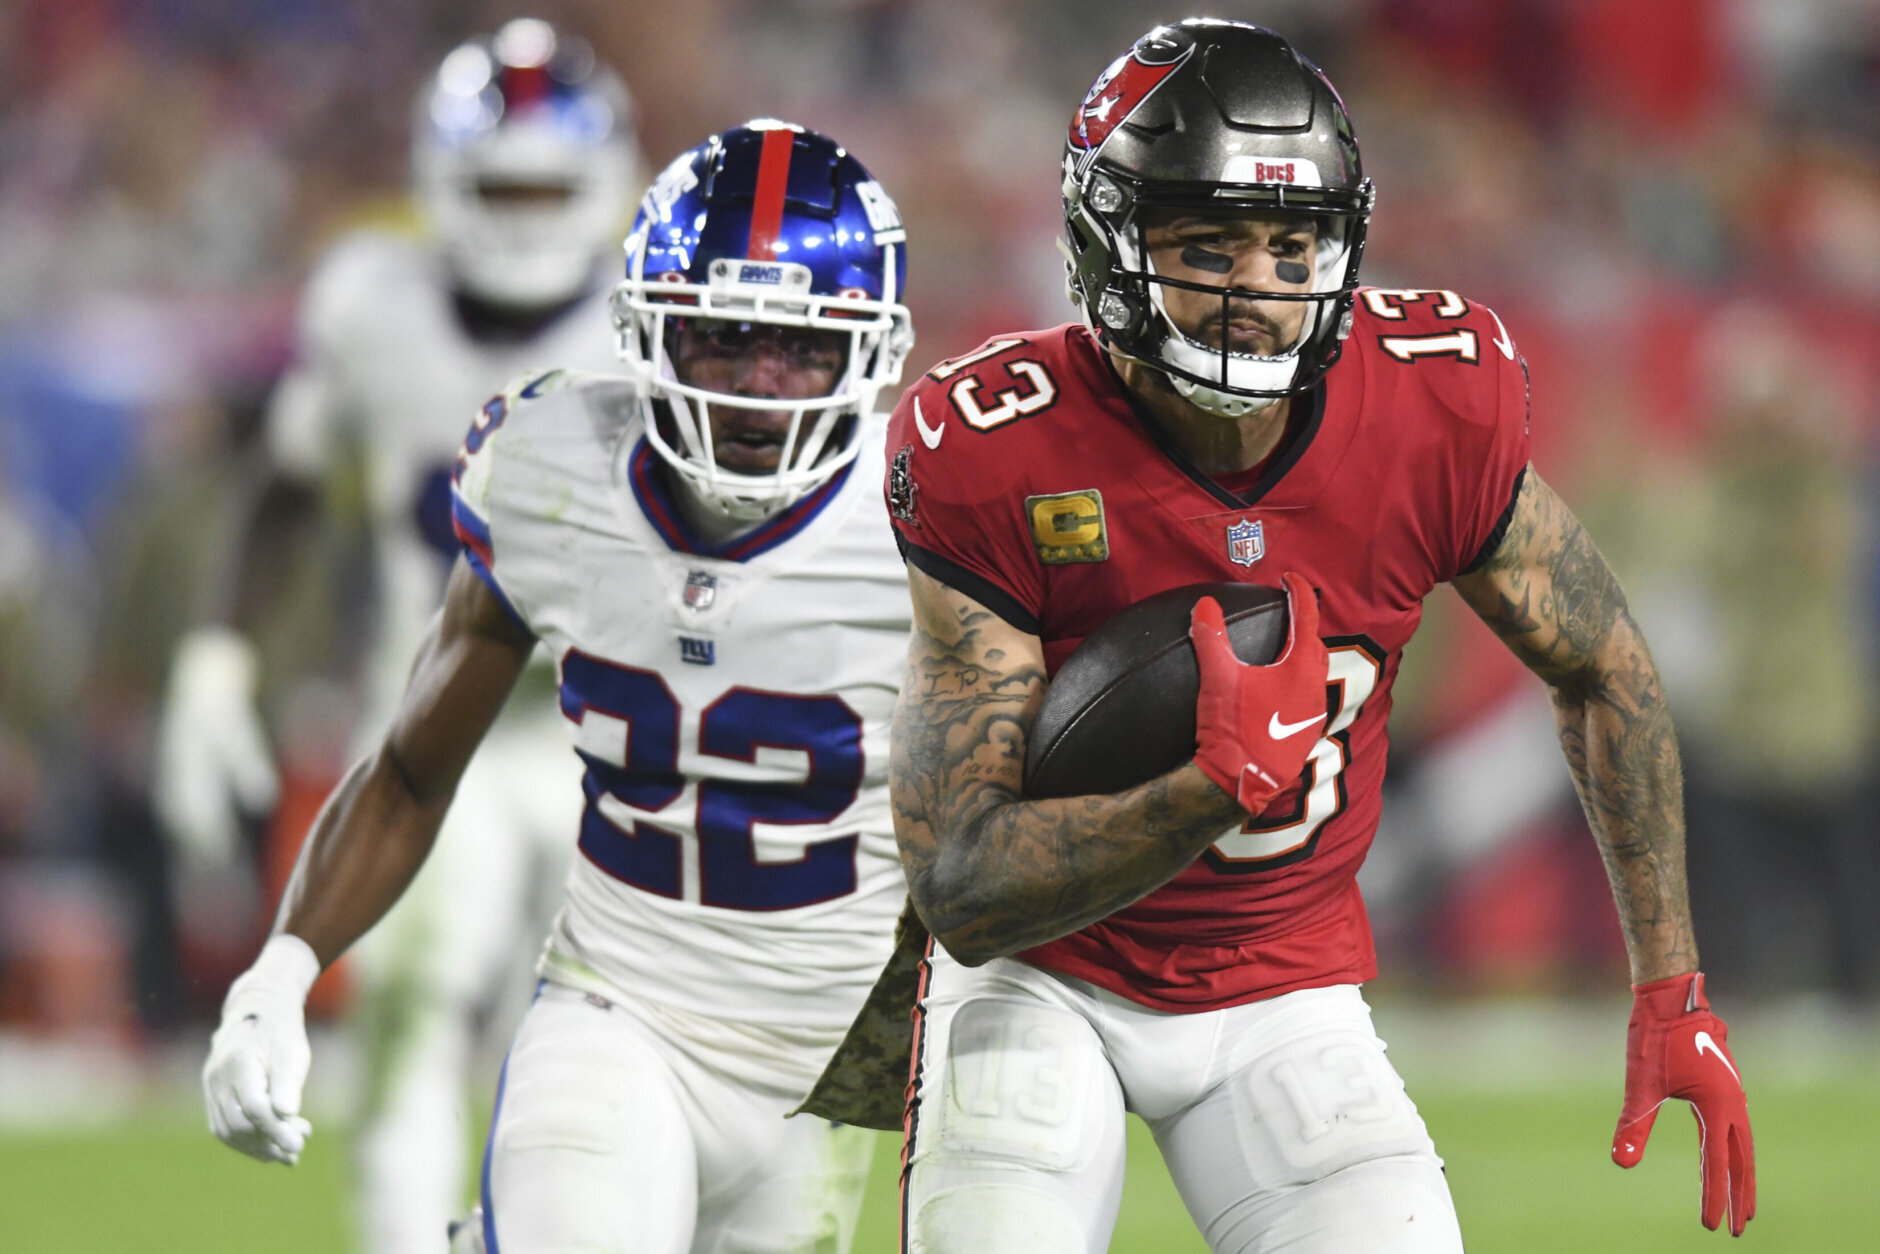 <p><em><strong>Giants 10</strong></em><br />
<em><strong>Bucs 30</strong></em></p>
<p>On a night when Tom Brady extended his ridiculous record of 288 straight games without a three-game losing streak and Daniel Jones dropped to 0-8 in primetime, a receiver stole the show: Mike Evans passed Mike Alstott for the Bucs&#8217; franchise touchdown record, which is wild considering receivers typically score less frequently than 90s-era running backs. Take a moment to imagine what Evans&#8217; career would be if he had Brady the whole time.</p>
